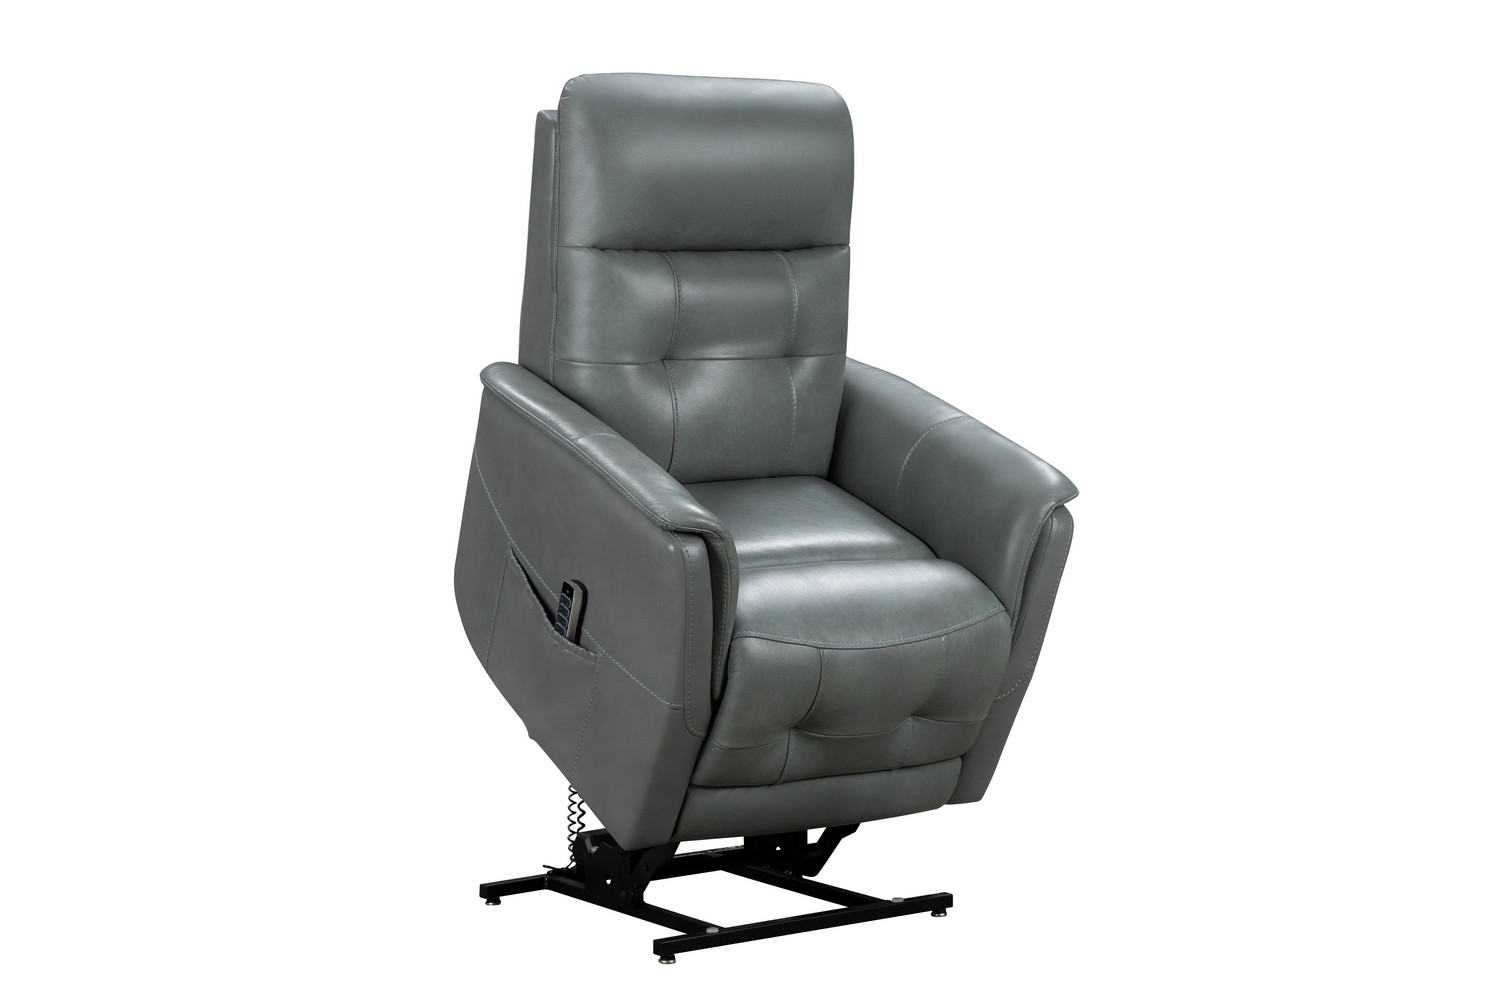 Barcalounger Livingston Lift Chair Recliner Chair with Power Head Rest, Power Lumbar and Lay Flat Mechanism - Antonio Green Gray/Leather Match